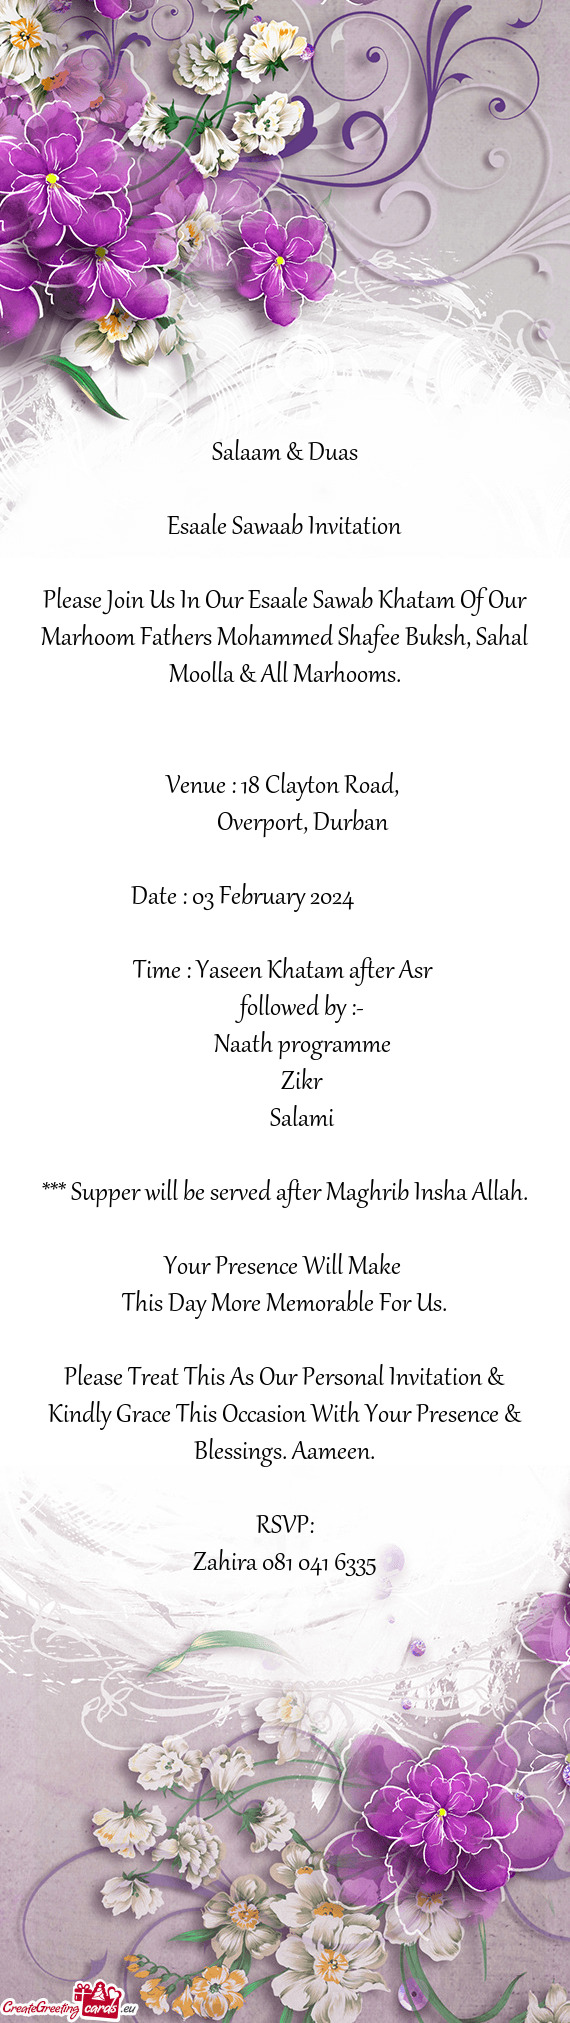 Please Join Us In Our Esaale Sawab Khatam Of Our Marhoom Fathers Mohammed Shafee Buksh, Sahal Moolla